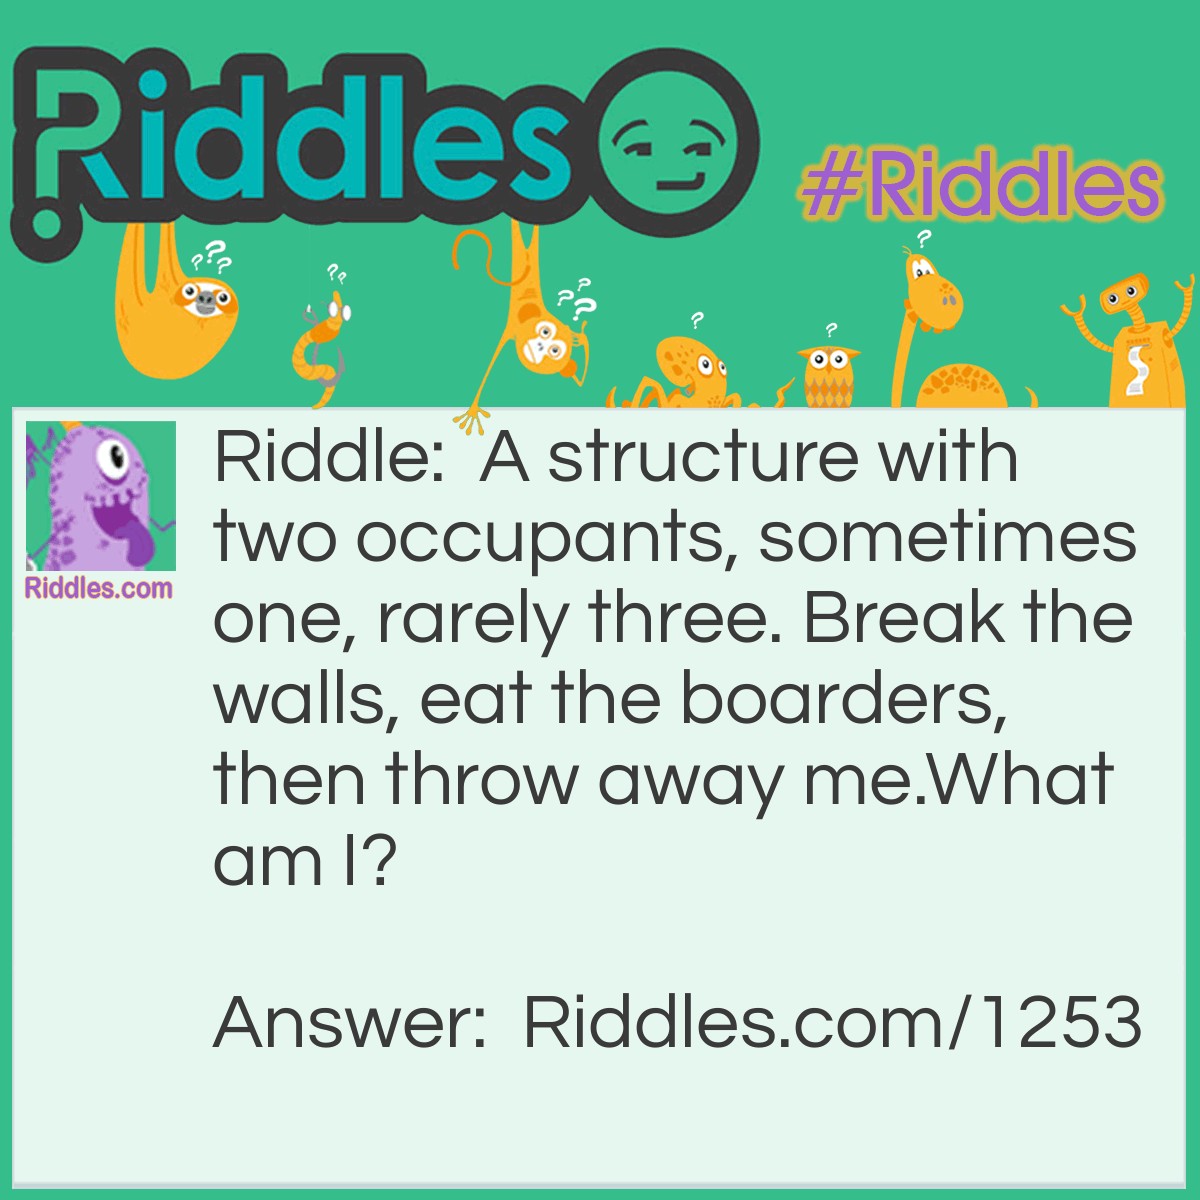 Riddle: A structure with two occupants, sometimes one, rarely three. Break the walls, eat the borders, then throw away me.
What am I? Answer: A peanut.